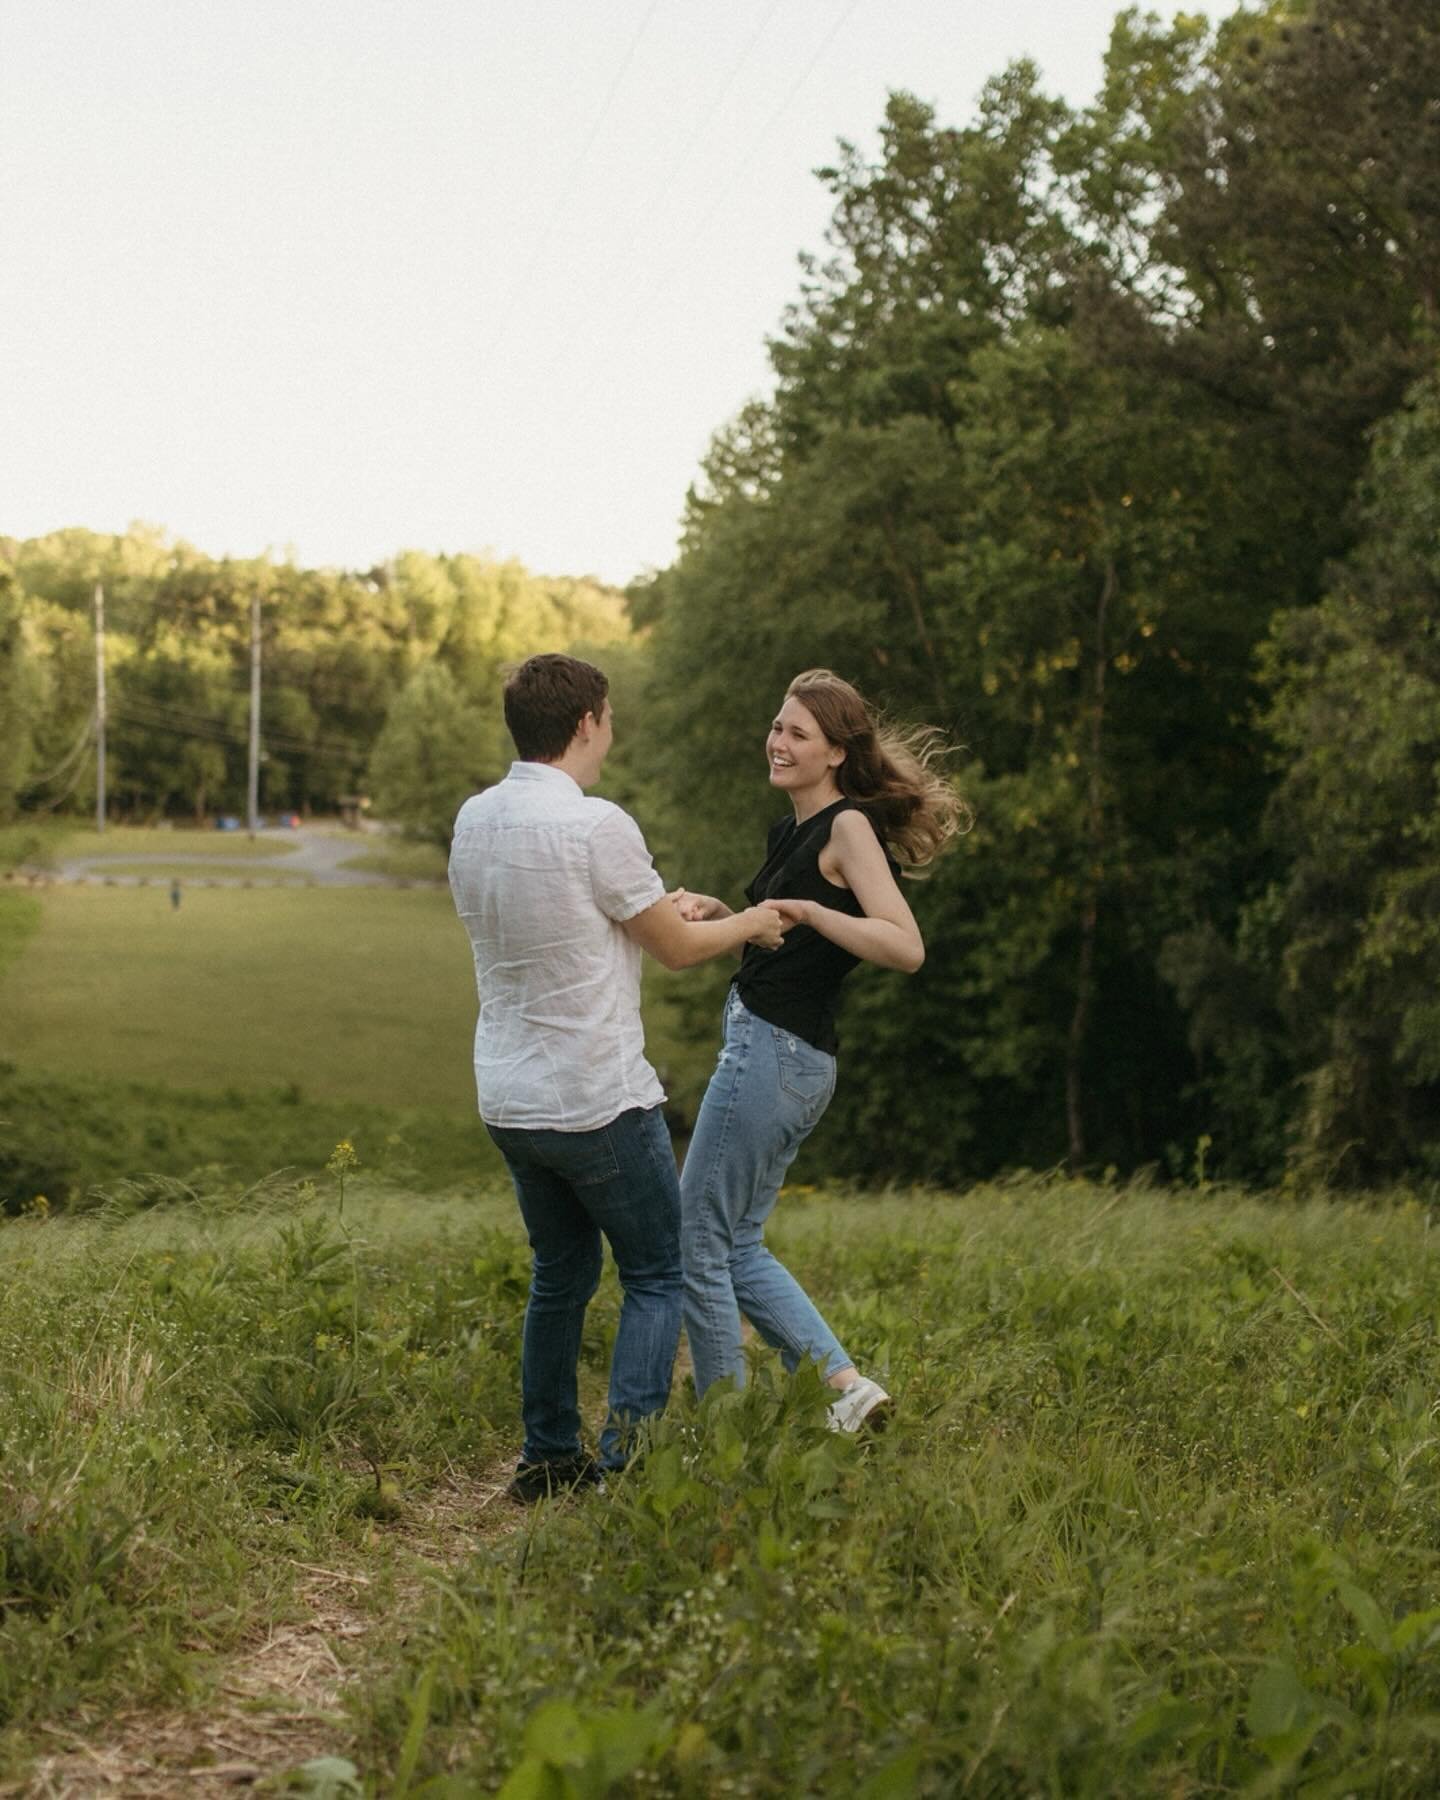 madeline &amp; alex ✨ a sweet lil engagement session by the river - so glad these two were up for everything I suggested, even scrambling up a hill to chase the sun!

#atlantaengagementphotographer